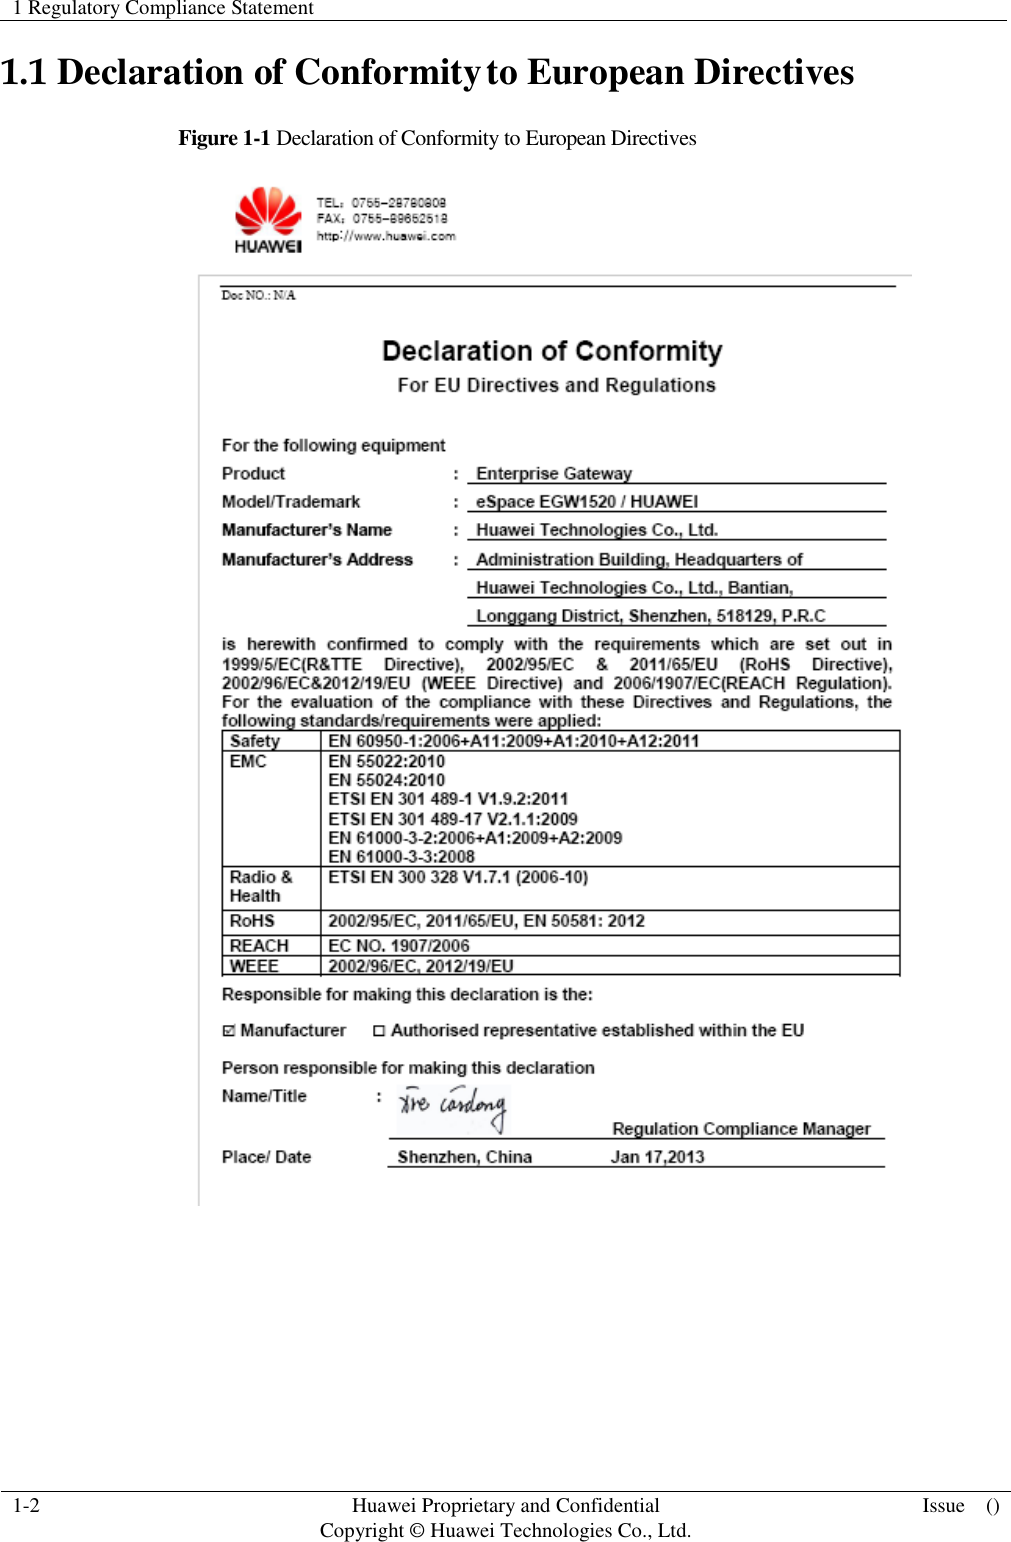 1 Regulatory Compliance Statement    1-2 Huawei Proprietary and Confidential                                     Copyright © Huawei Technologies Co., Ltd. Issue    ()  1.1 Declaration of Conformity to European Directives Figure 1-1 Declaration of Conformity to European Directives    